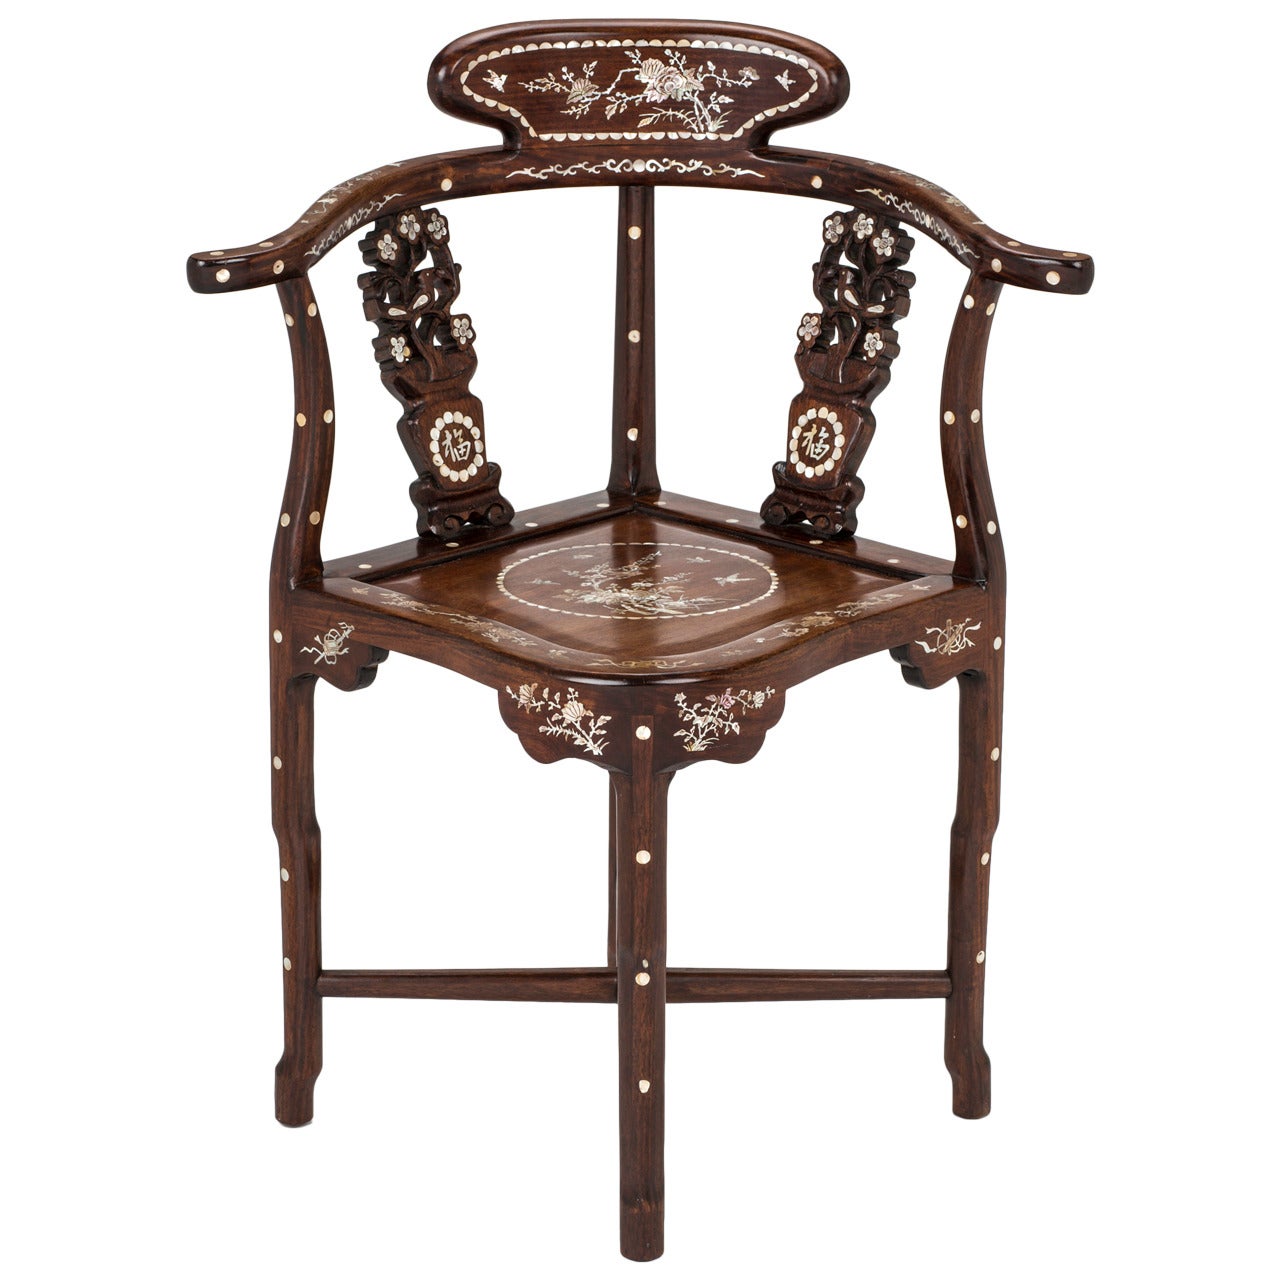 Four Rosewood, Mother of Pearl Inlay Corner Chair